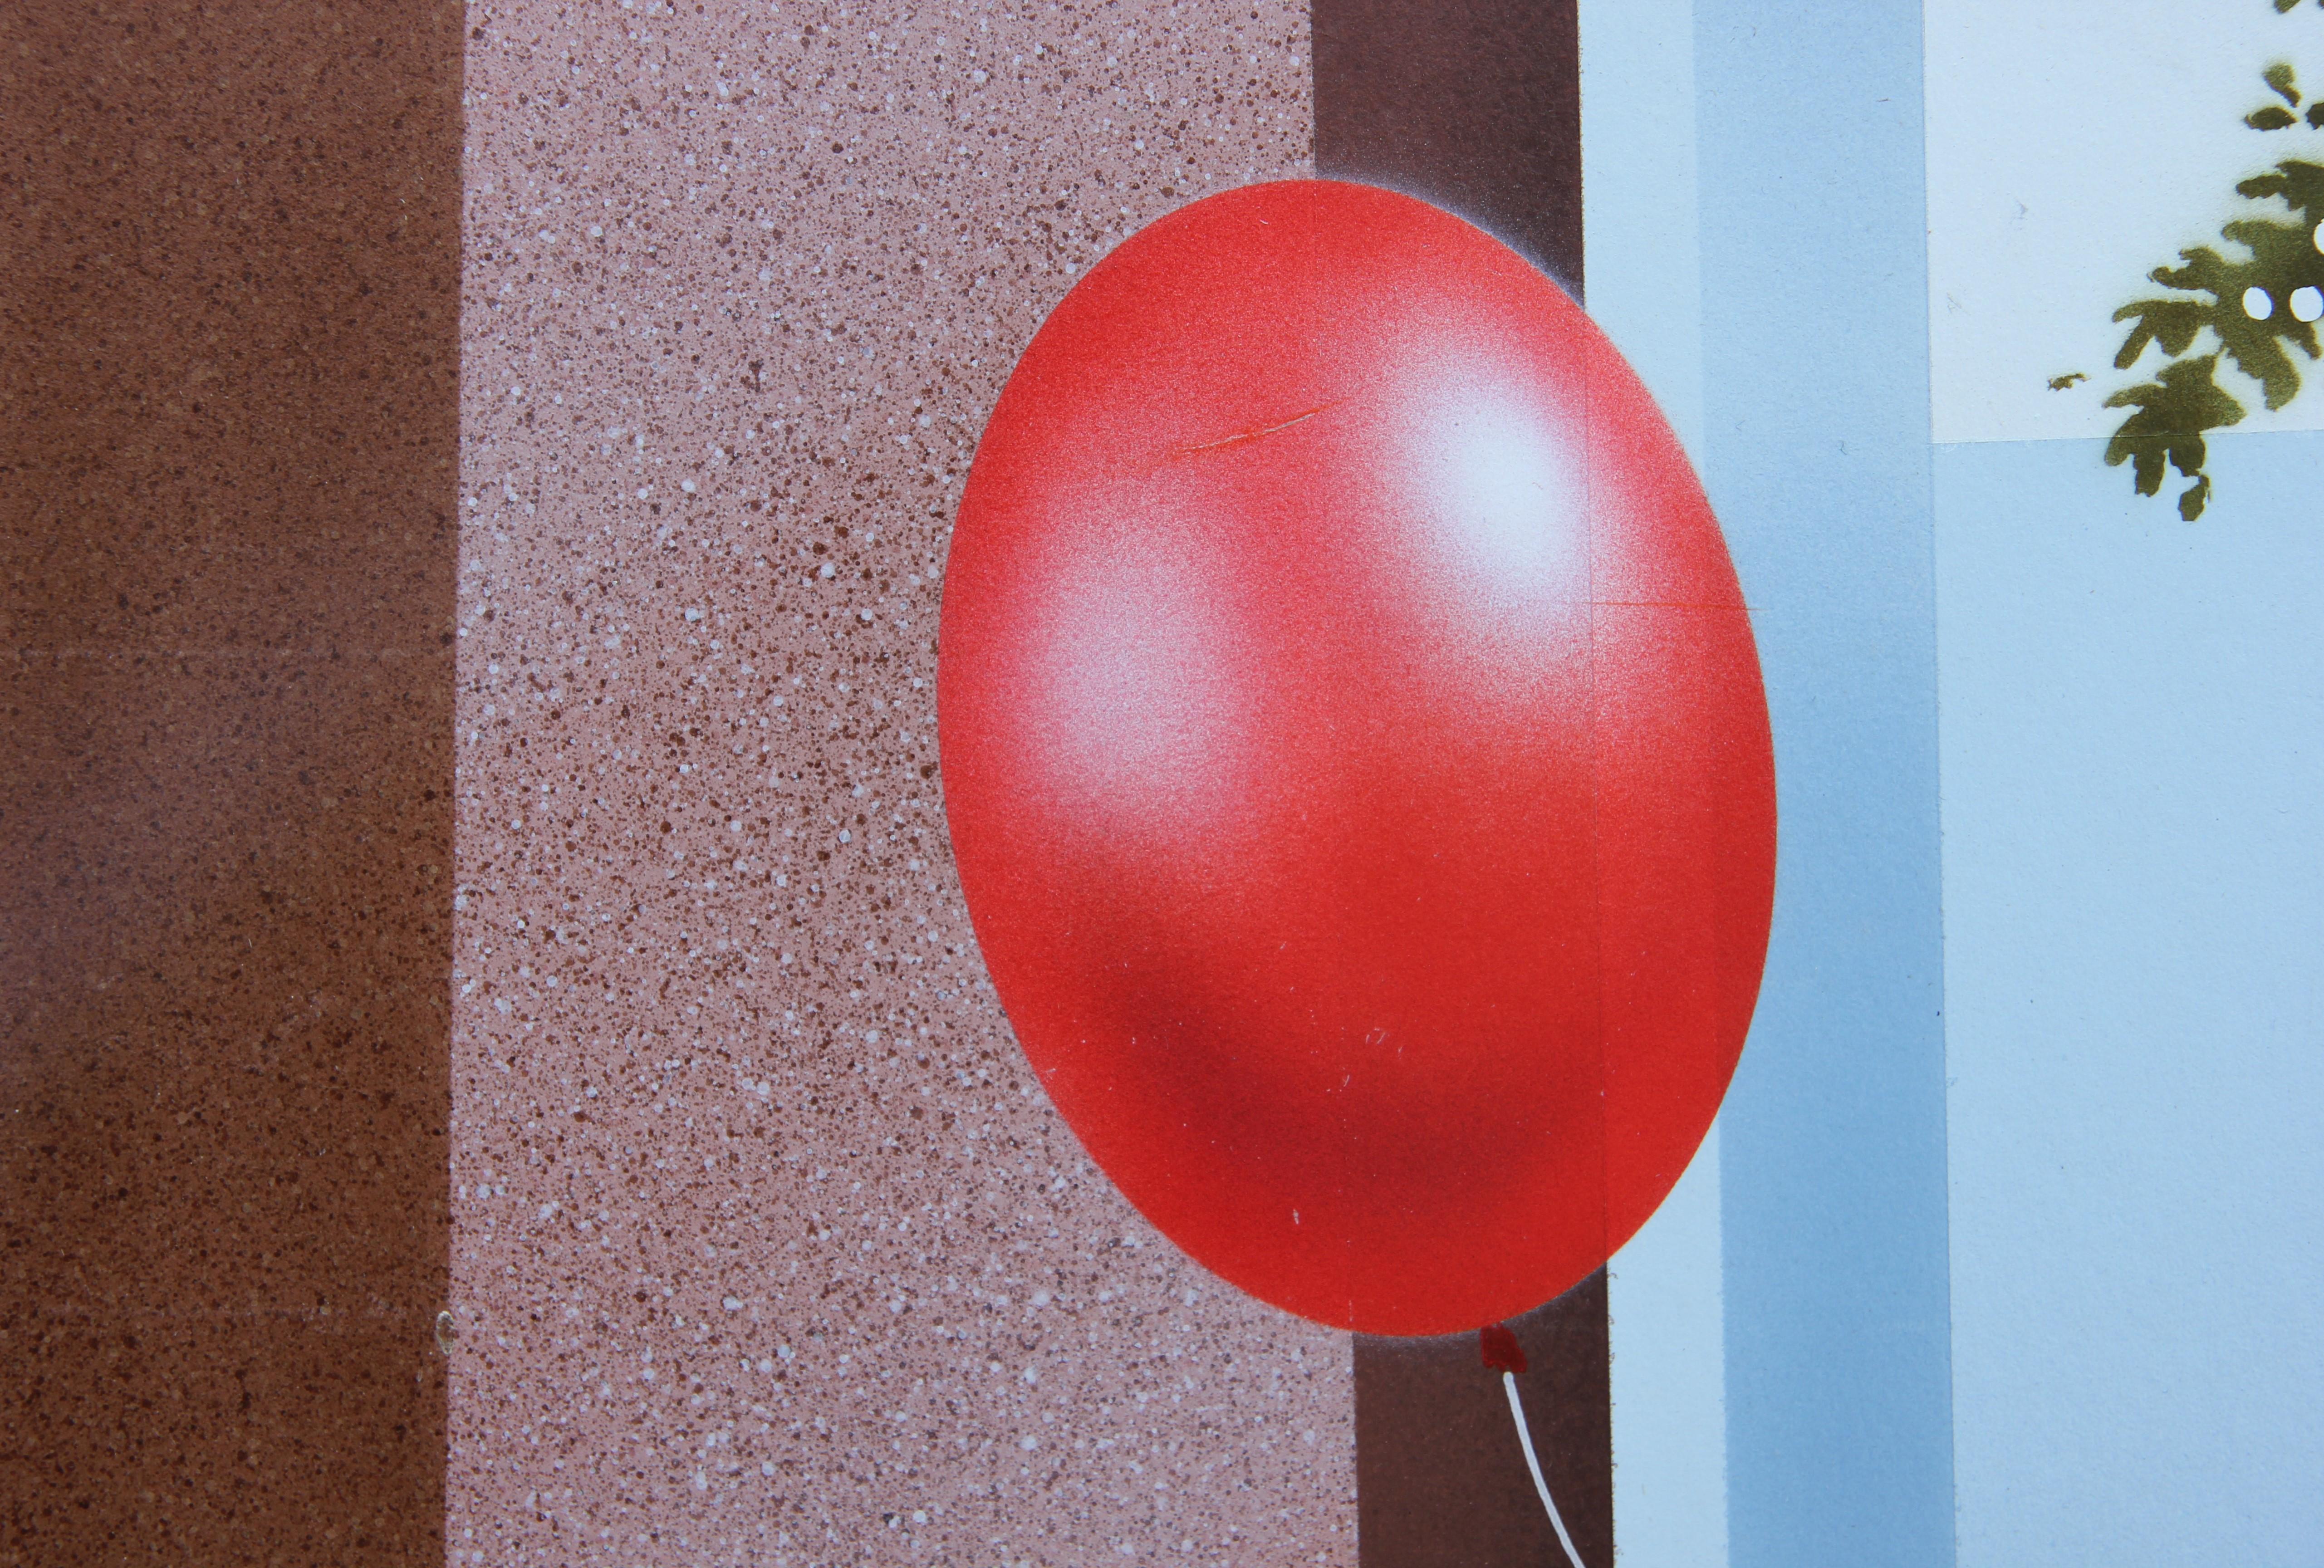 Realist painting of a group of red, green, and blue balloons floating out of the open doors of a shopping center as a figure sits inside. Painting by Texas modernist painter Boyd Graham from the 1970s-1980s. Signed in the front lower right corner.